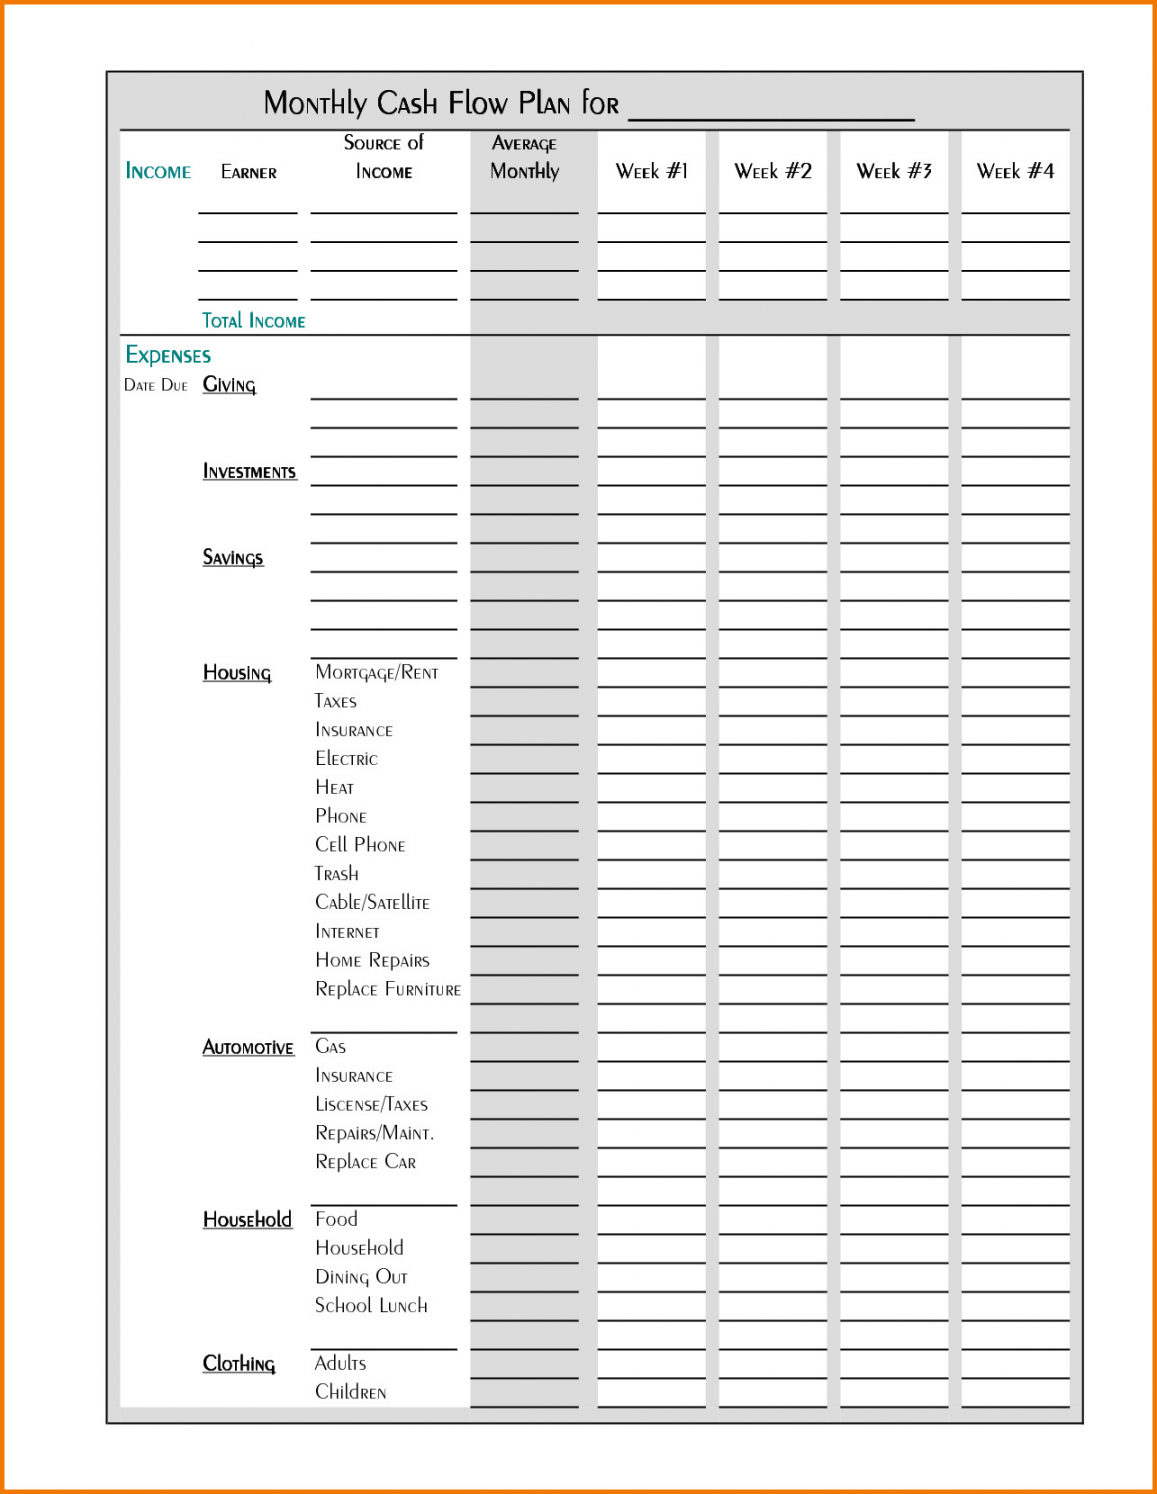 sample school budget spreadsheet free expense monthly income monthly salary budget template word